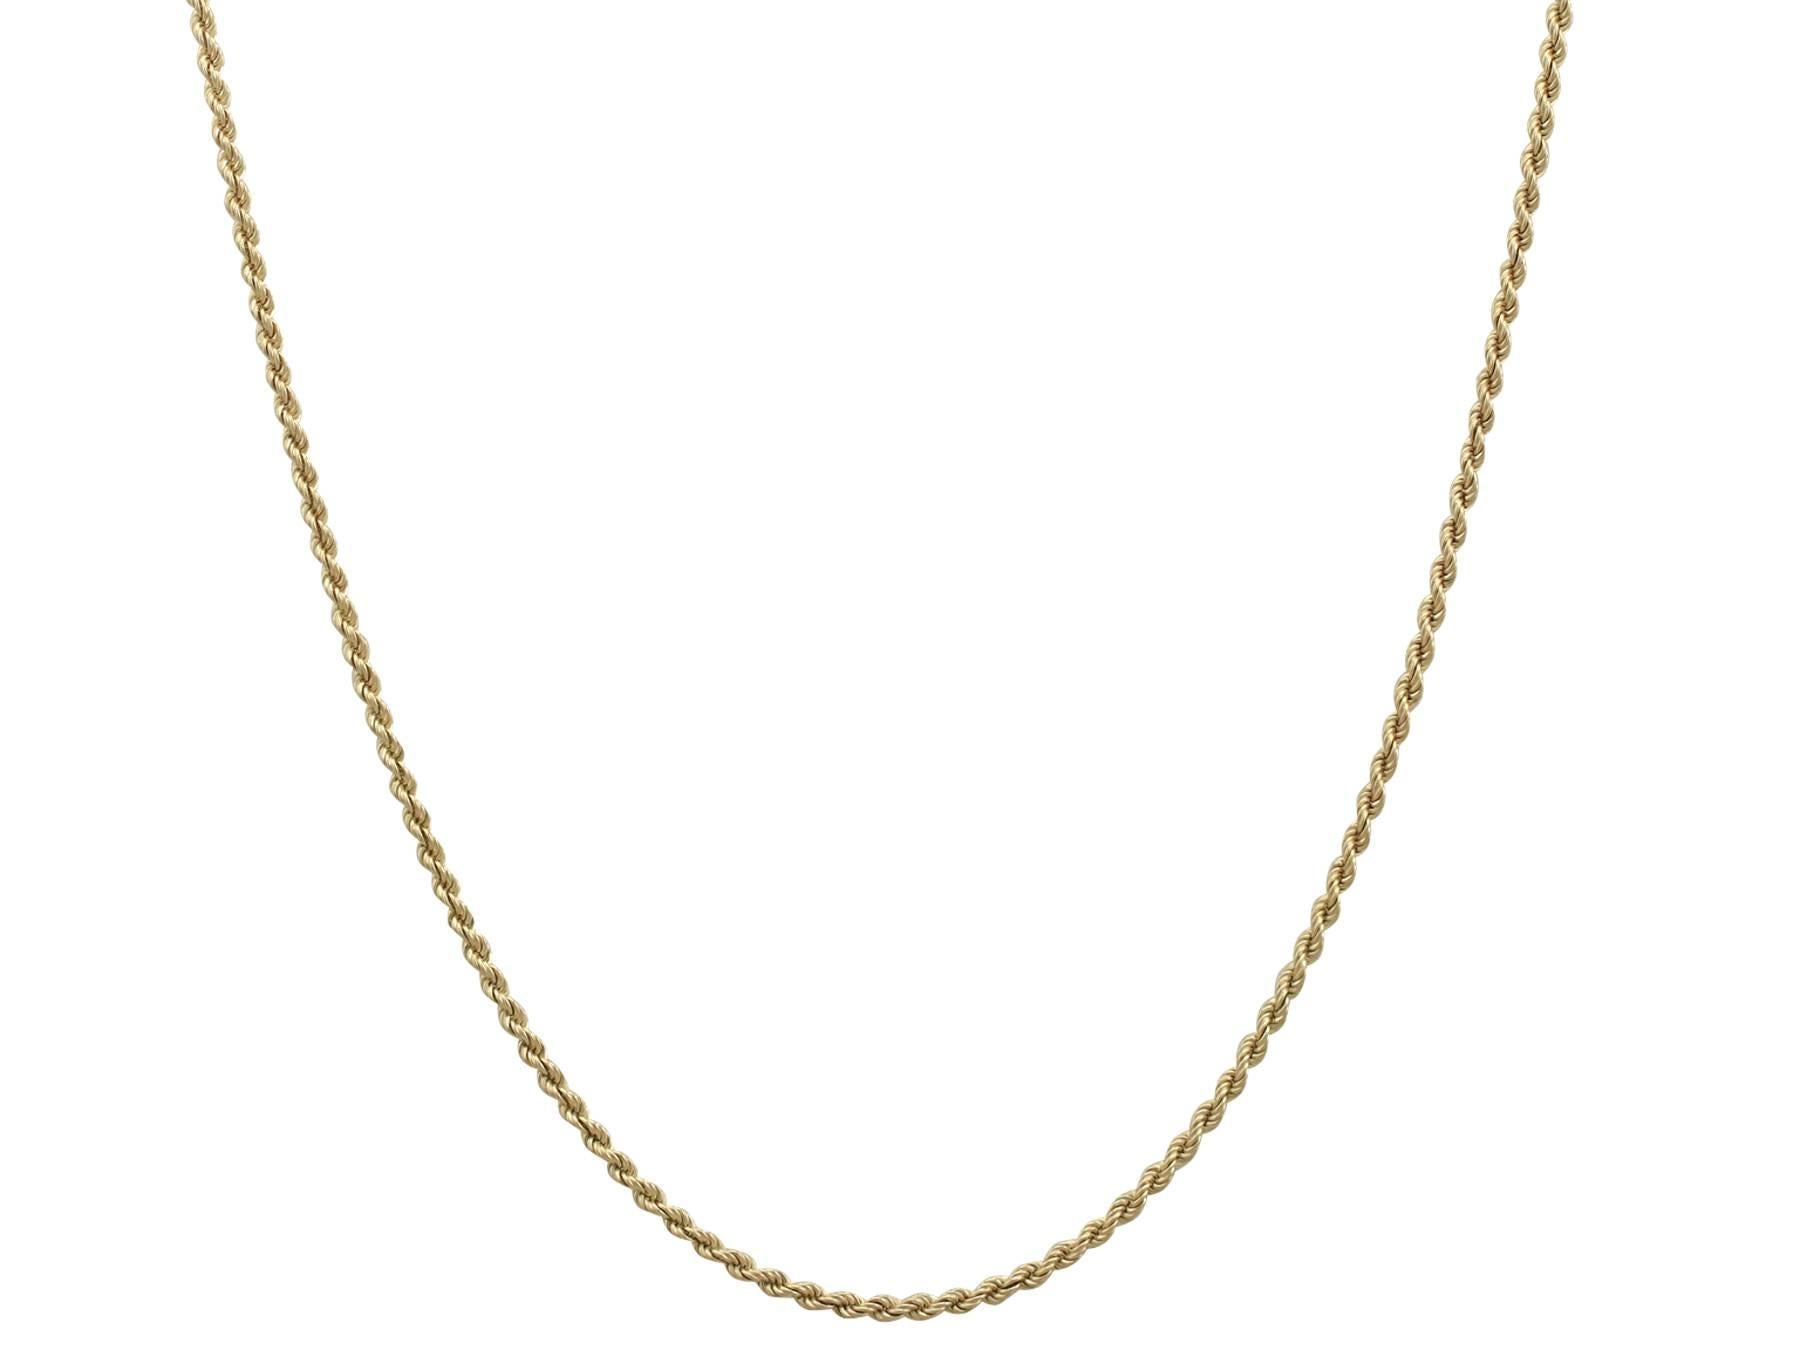 An impressive vintage 18 karat yellow gold rope chain; part of our diverse vintage jewelry and estate jewelry collections

This fine and impressive rope chain has been crafted in 18k yellow gold.

The chain has a rope style design, giving the